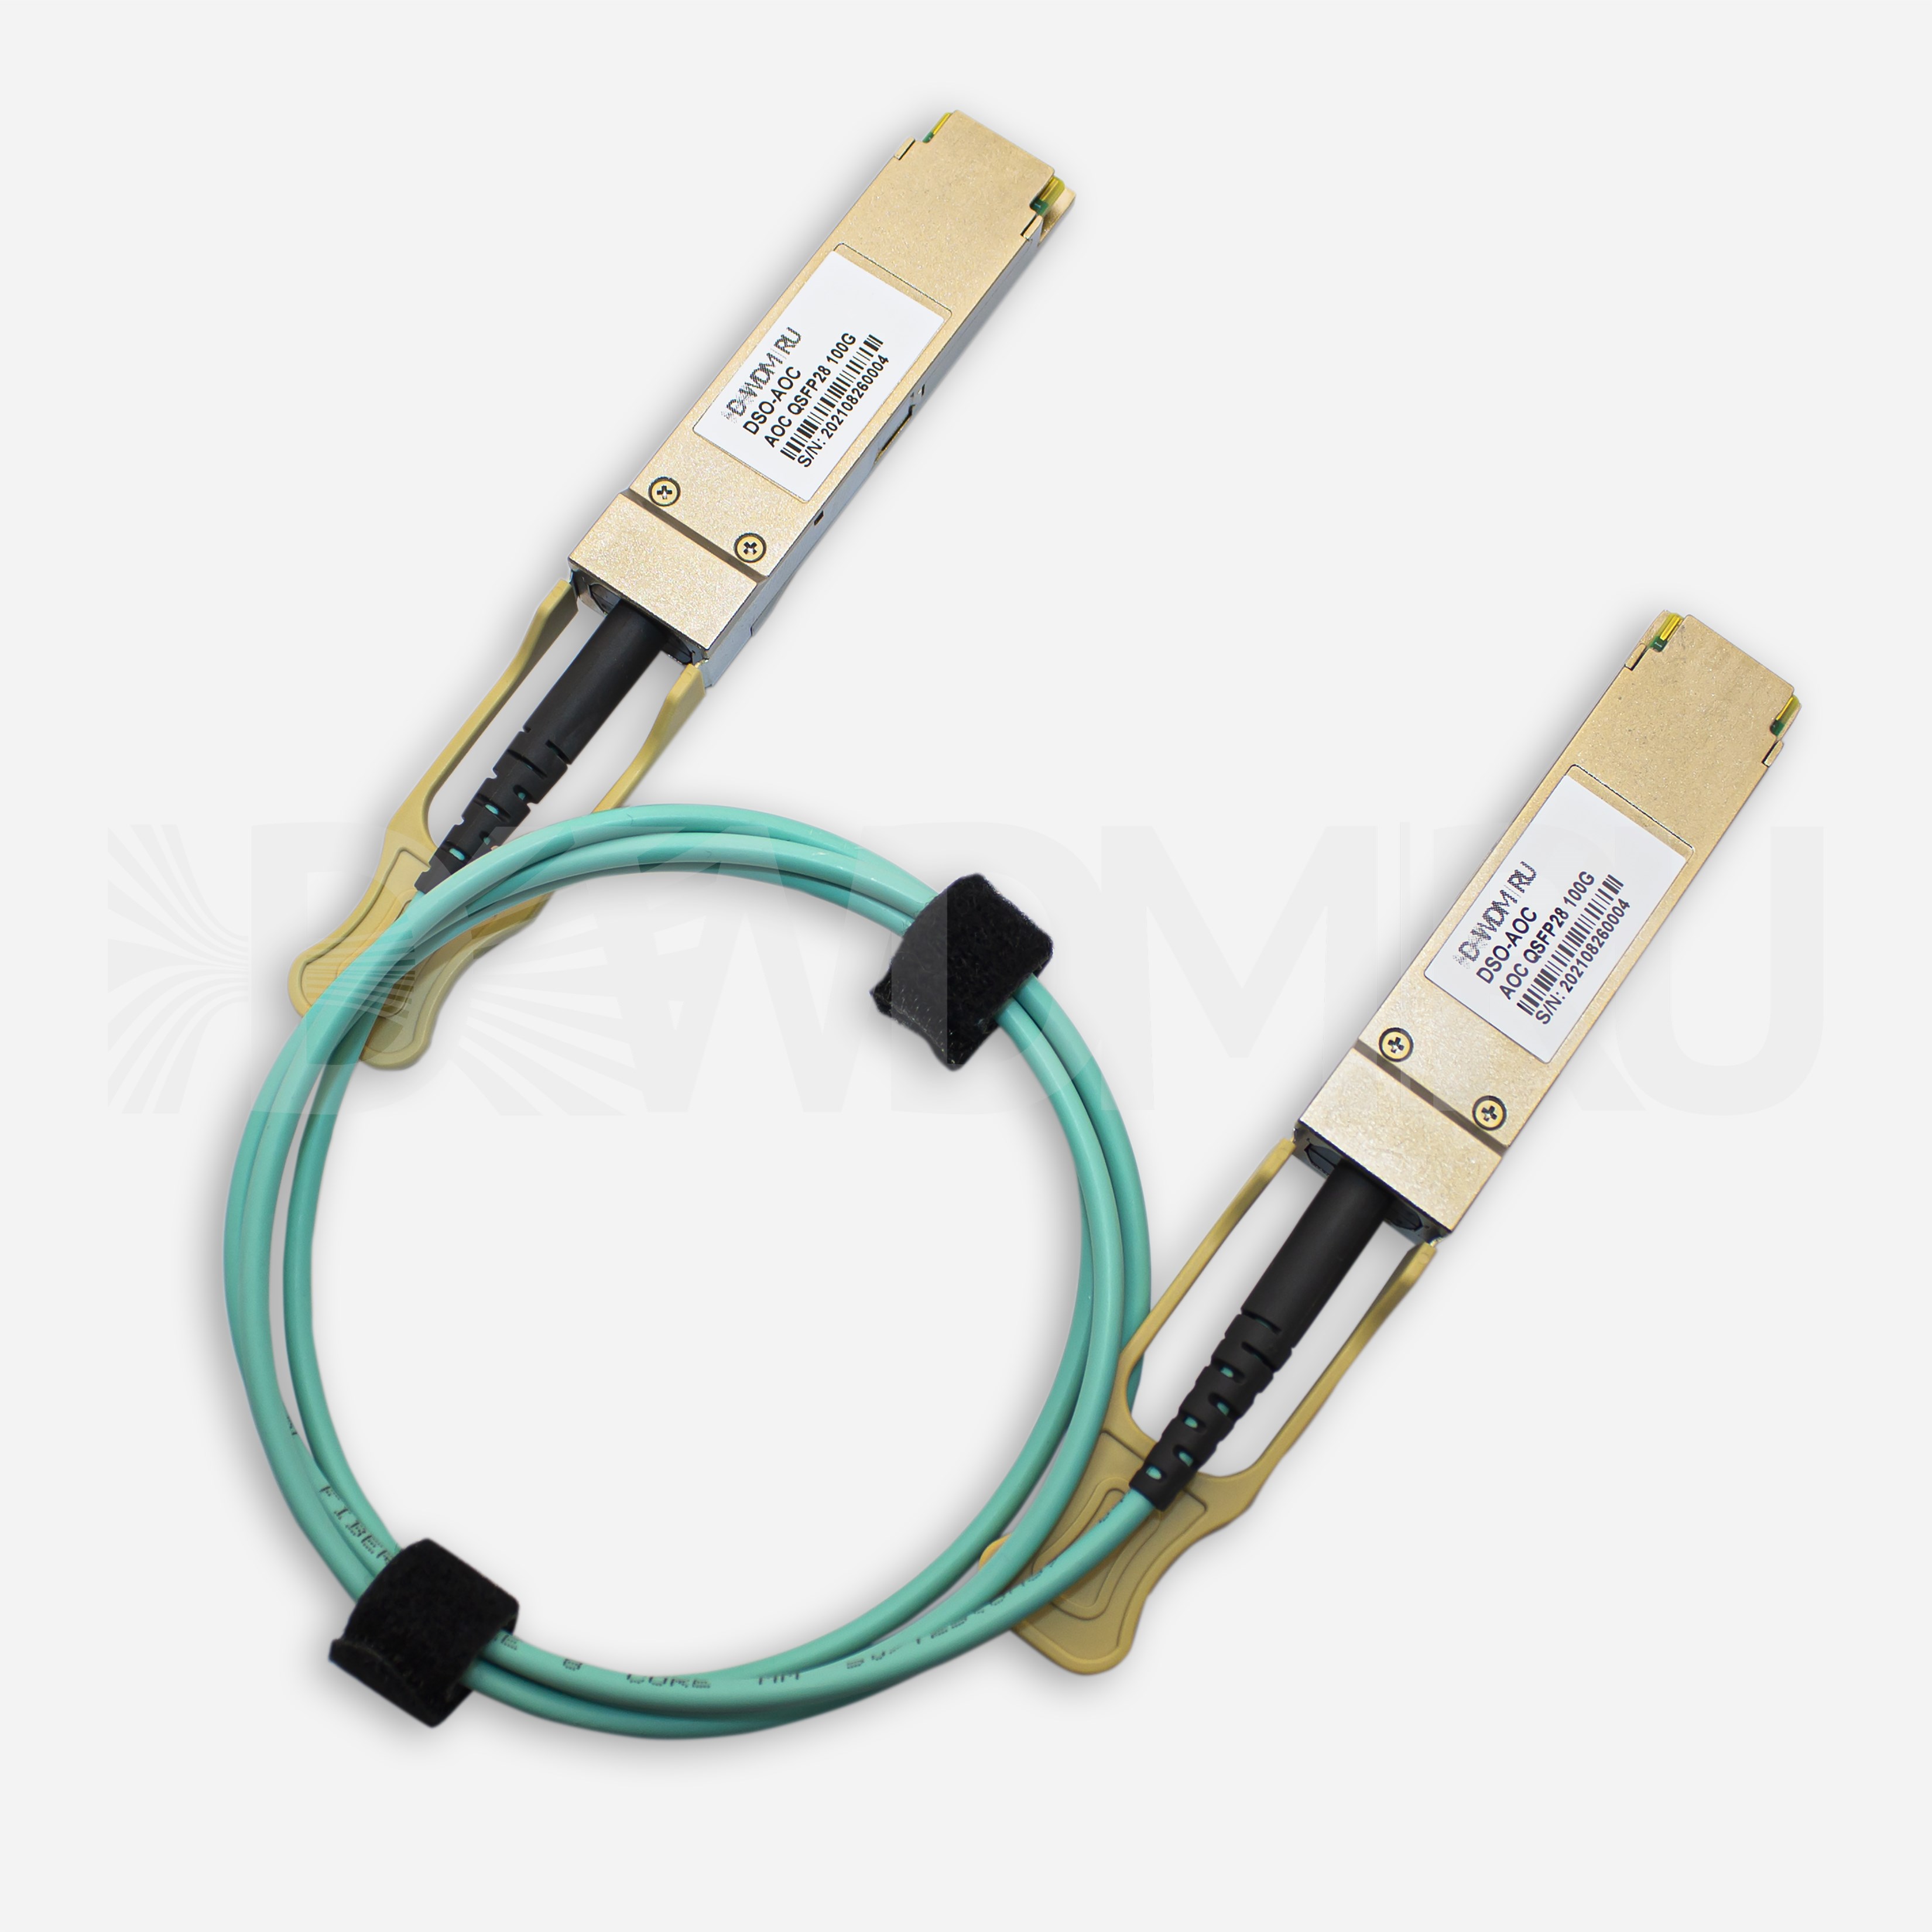 Active Optical Cable, QSFP28, 100 Гб/с, 5 м- ДВДМ.РУ (DSO-AOC-100-5)